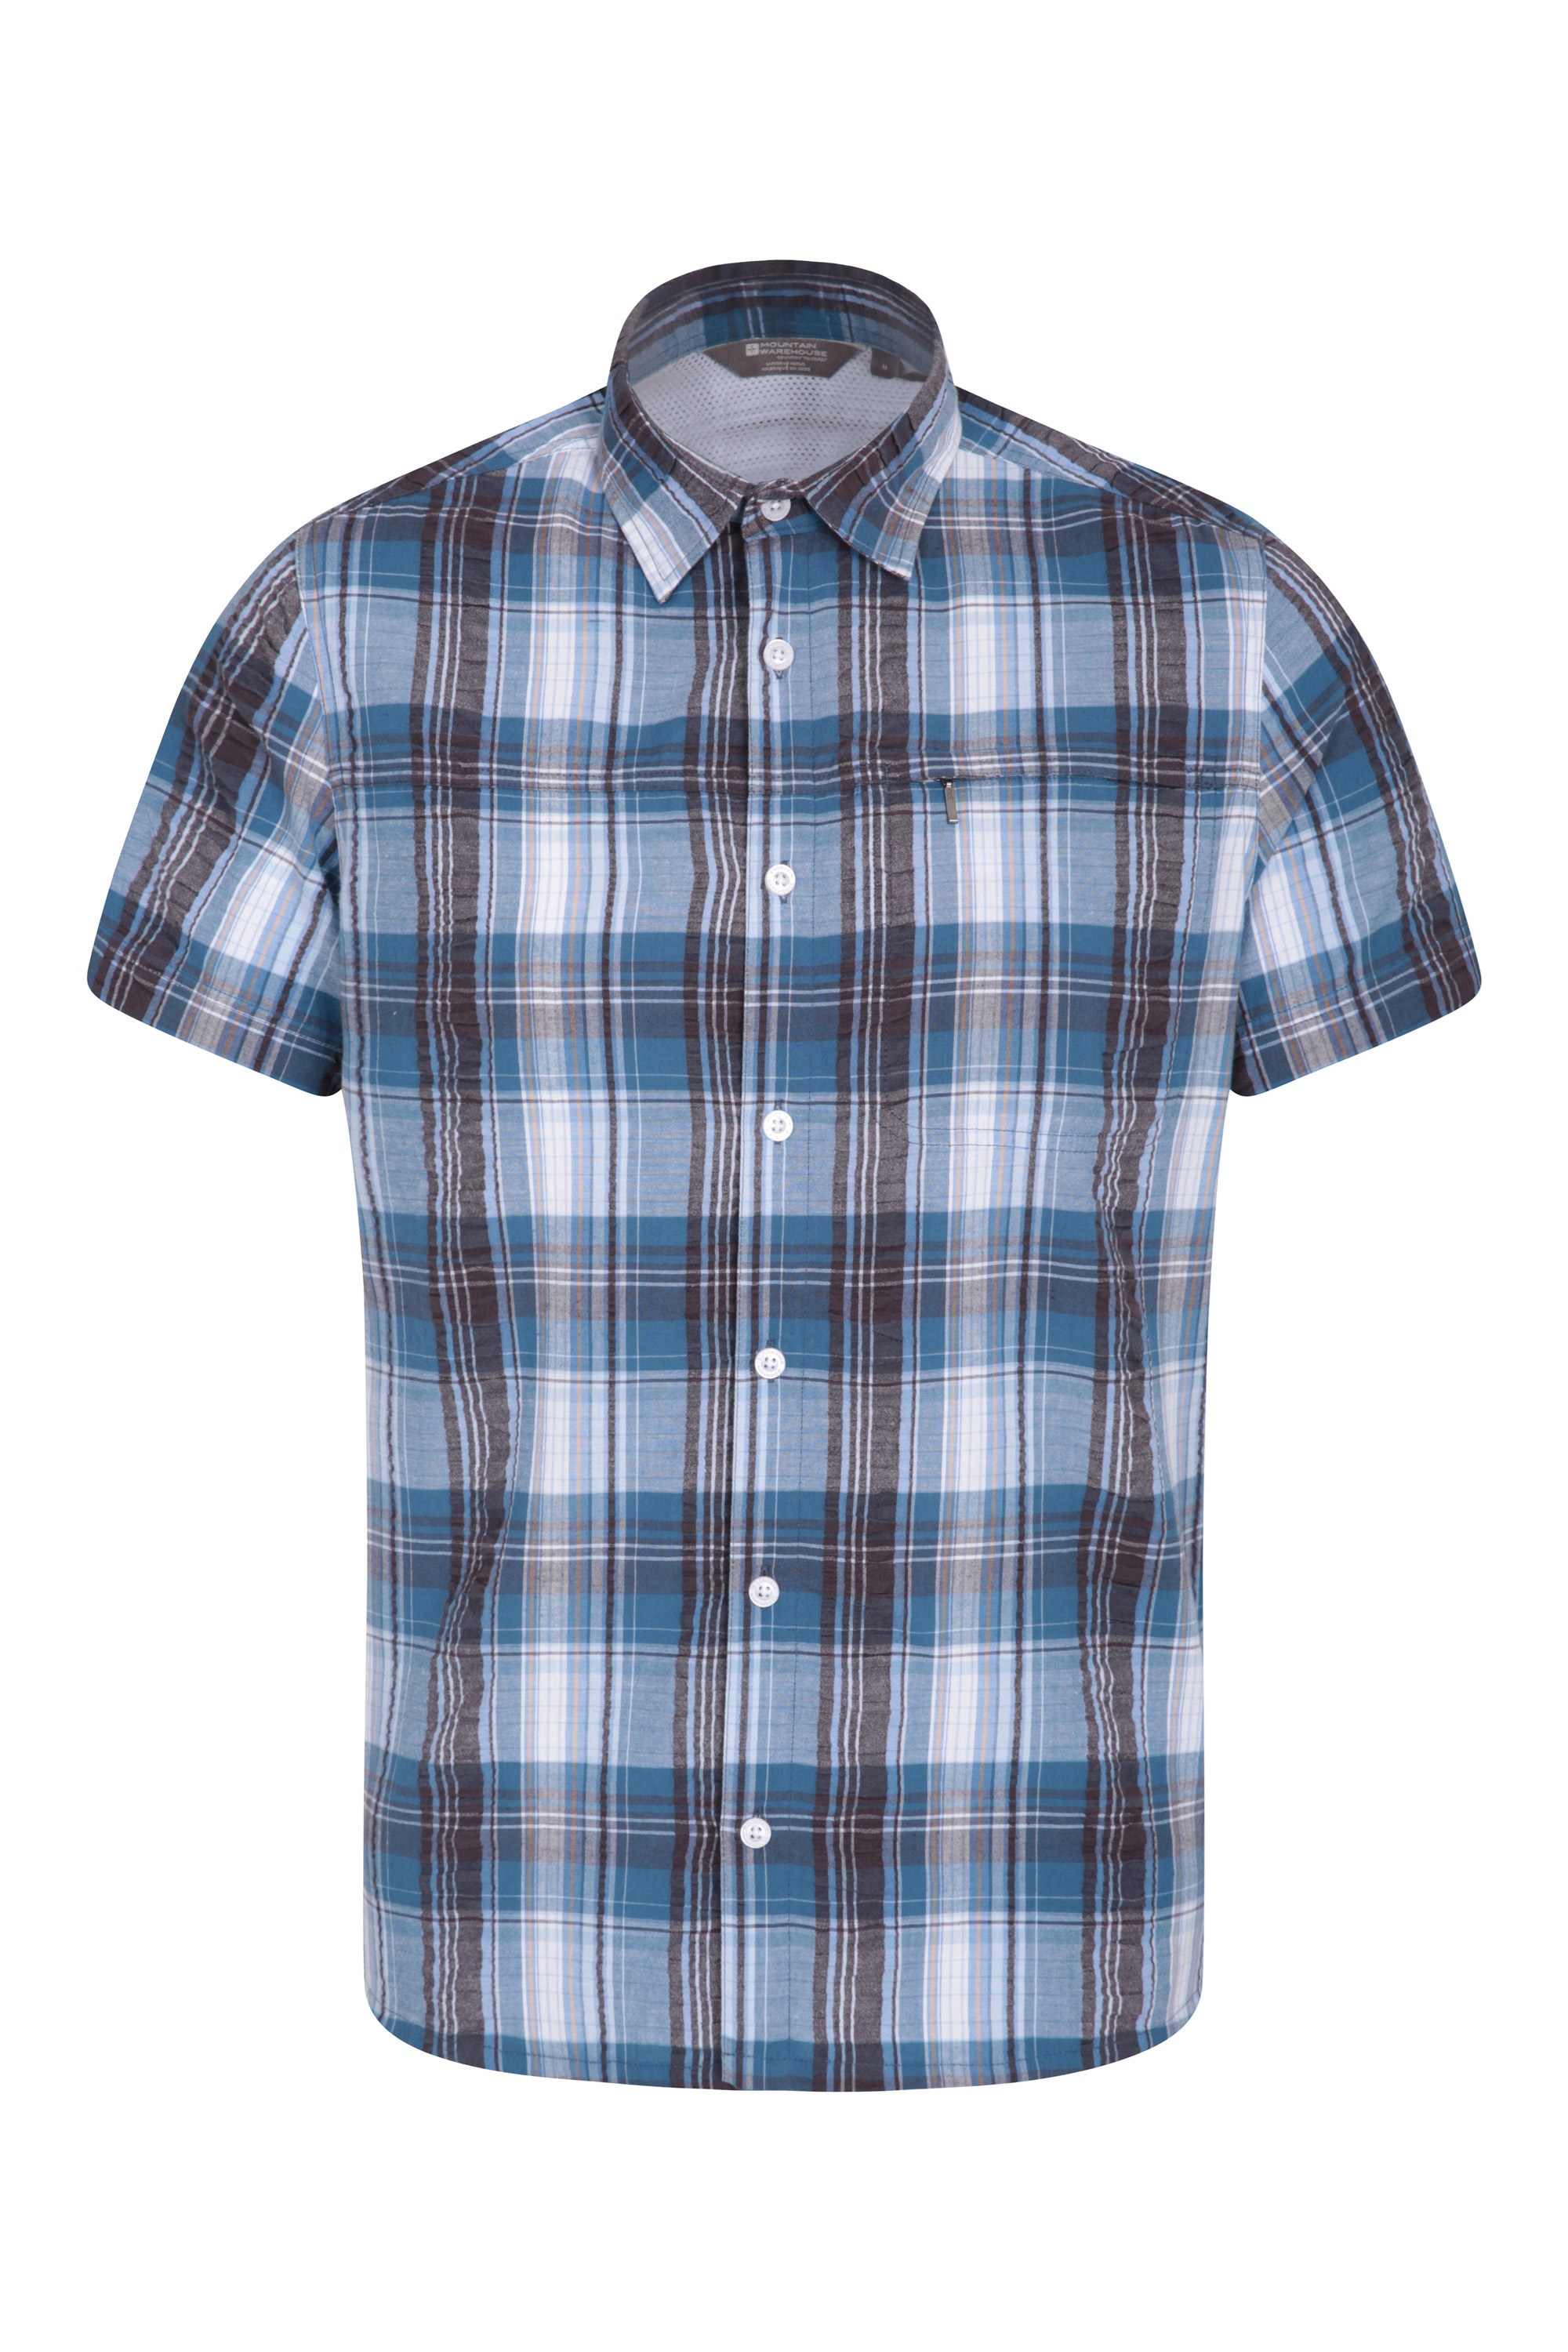 XS Mountain Warehouse Holiday Mens Shirt in Navy with Short Sleeved 